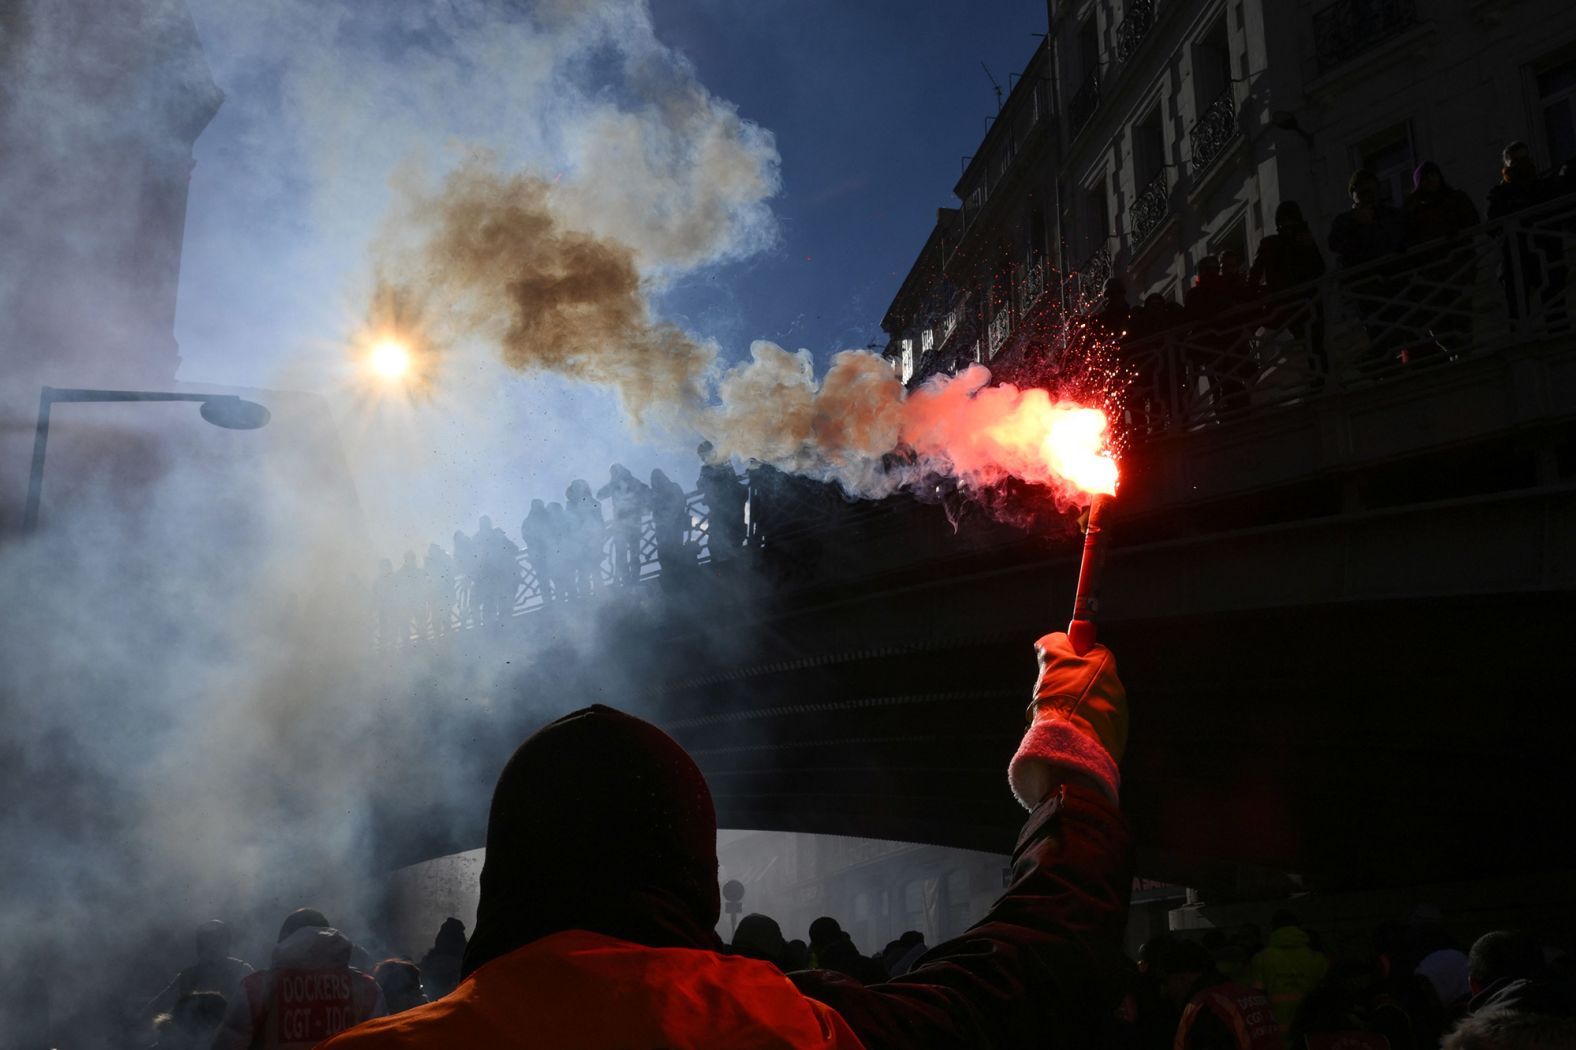 A protester waves a flare during a rally called by French trade unions against the <a href="index.php?page=&url=https%3A%2F%2Fwww.cnn.com%2F2023%2F01%2F18%2Fintl_business%2Ffrance-pension-protests%2Findex.html" target="_blank">government pension reform plan</a> in Marseille, France, on Thursday, January 19.